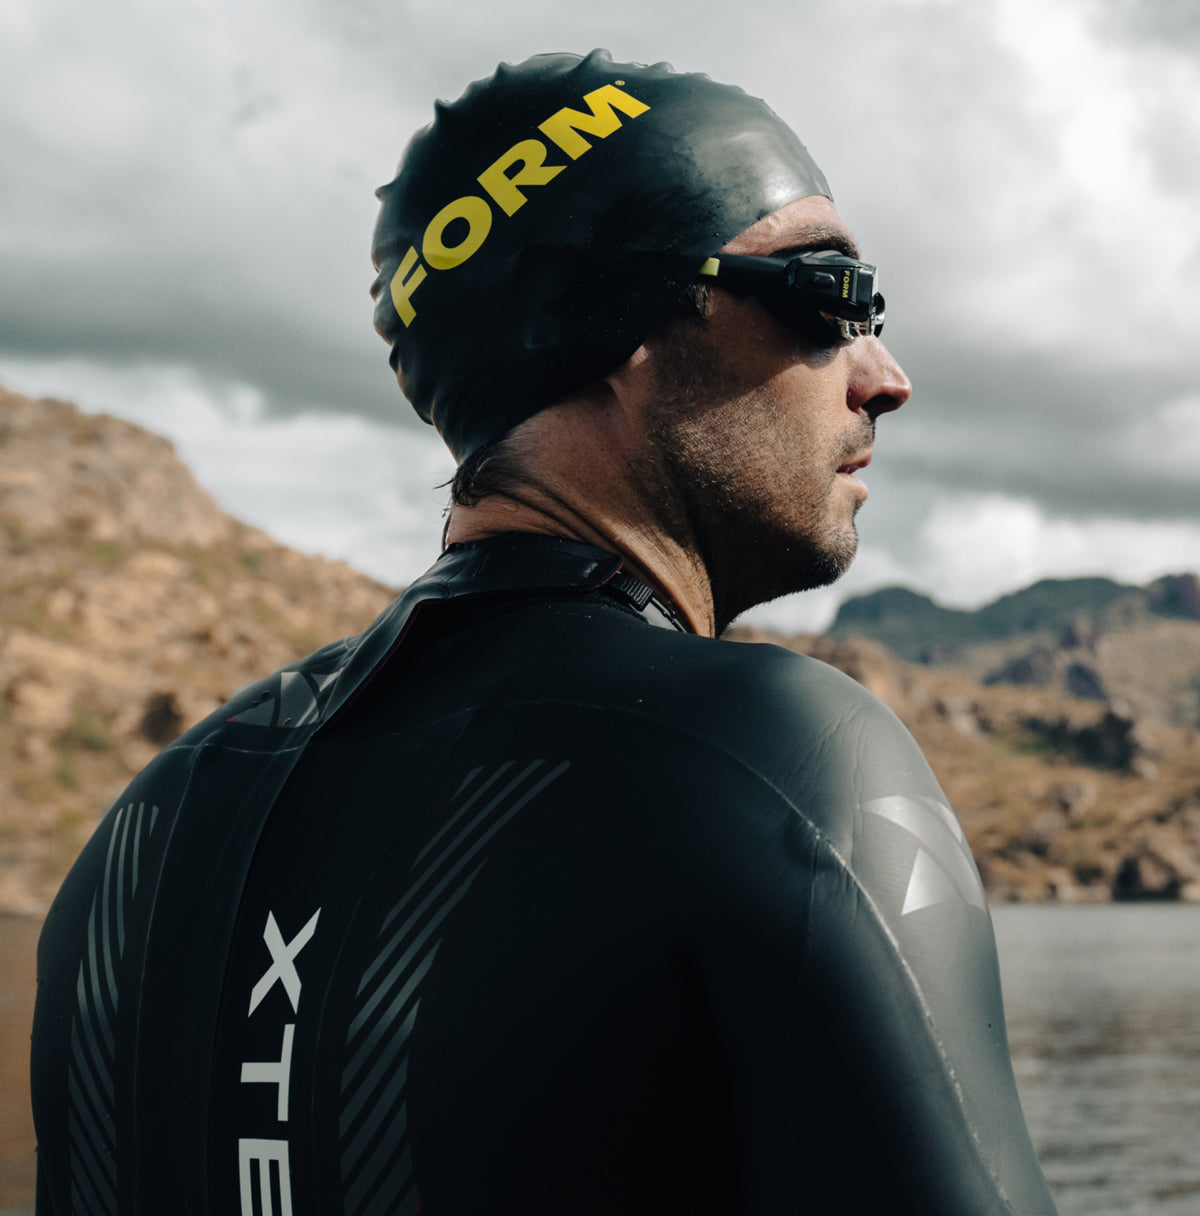 Stroke Rate and Heart Rate Tracking Improvements for Open Water swimming